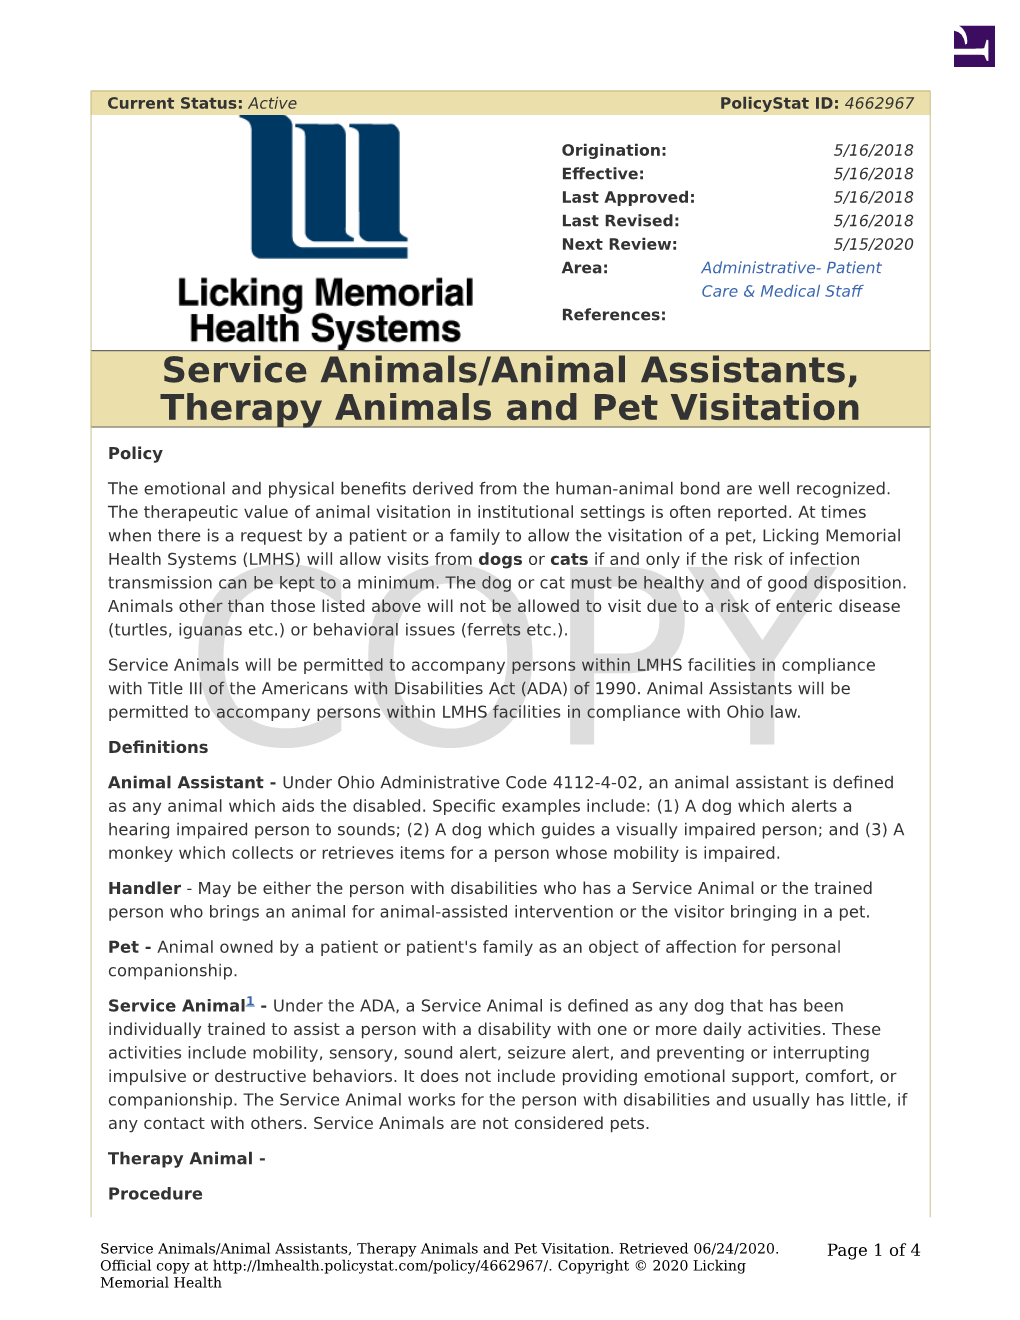 Service Animals/Animal Assistants, Therapy Animals and Pet Visitation